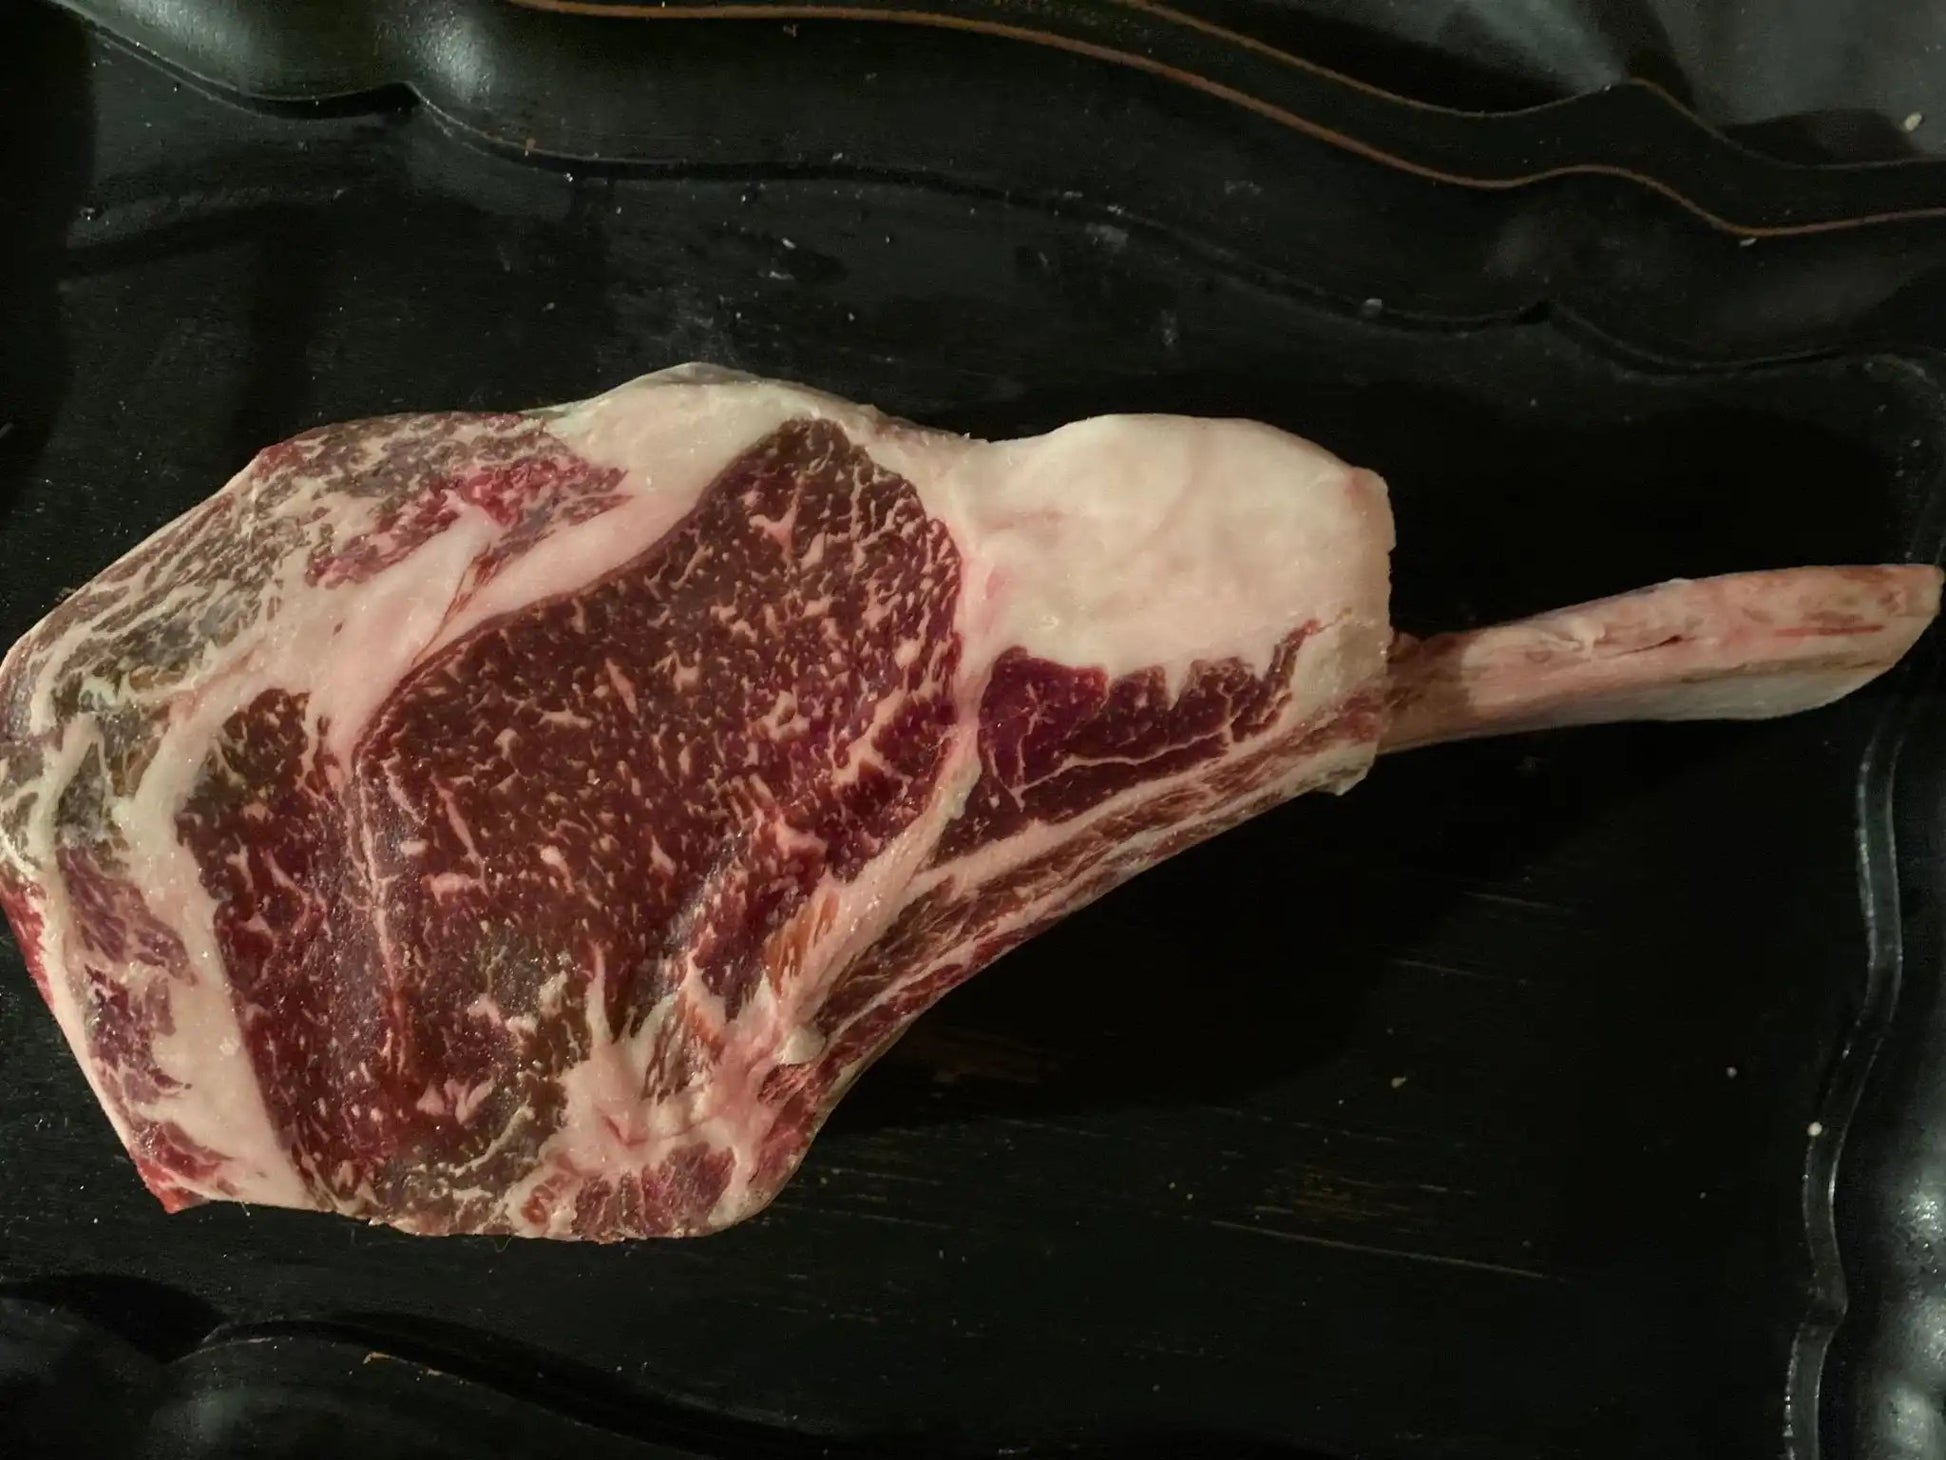 100% All-Natural Grass-fed American Wagyu Beef Cowboy Steak - The Hufeisen-Ranch (WYO Wagyu)